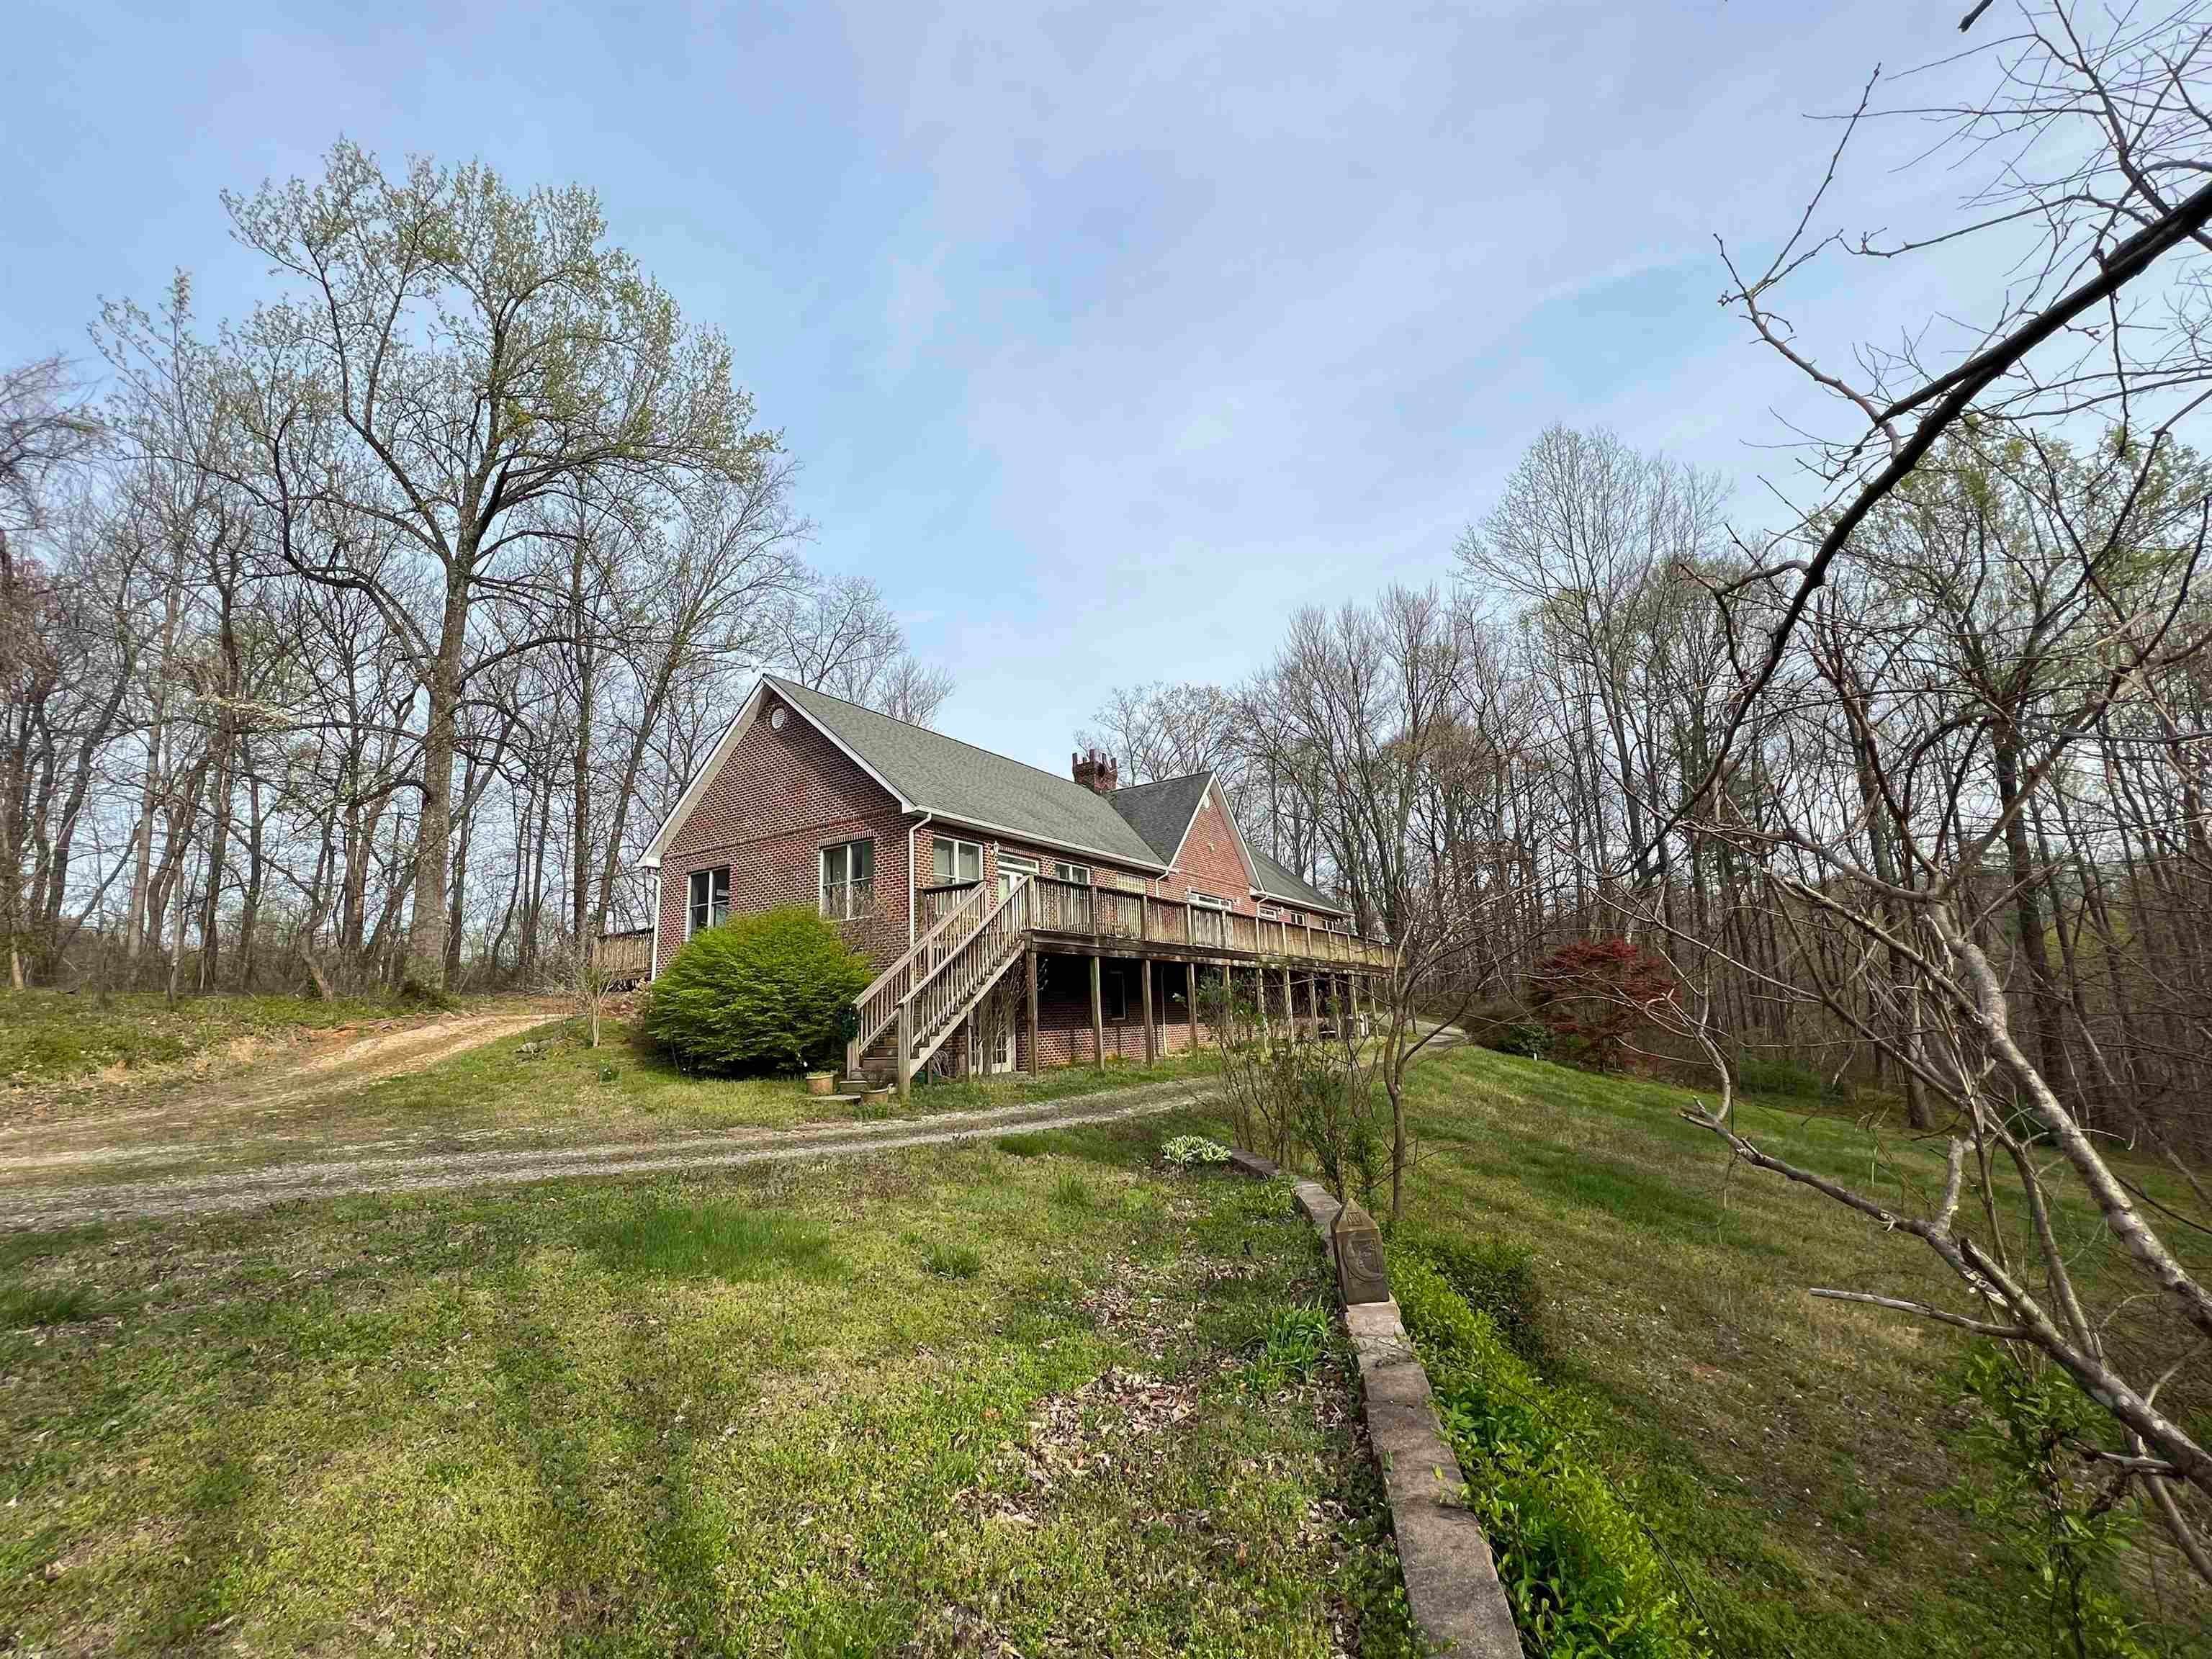 44. Single Family Homes for Sale at 338 BATTERY HILL Lane Tyro, Virginia 22976 United States